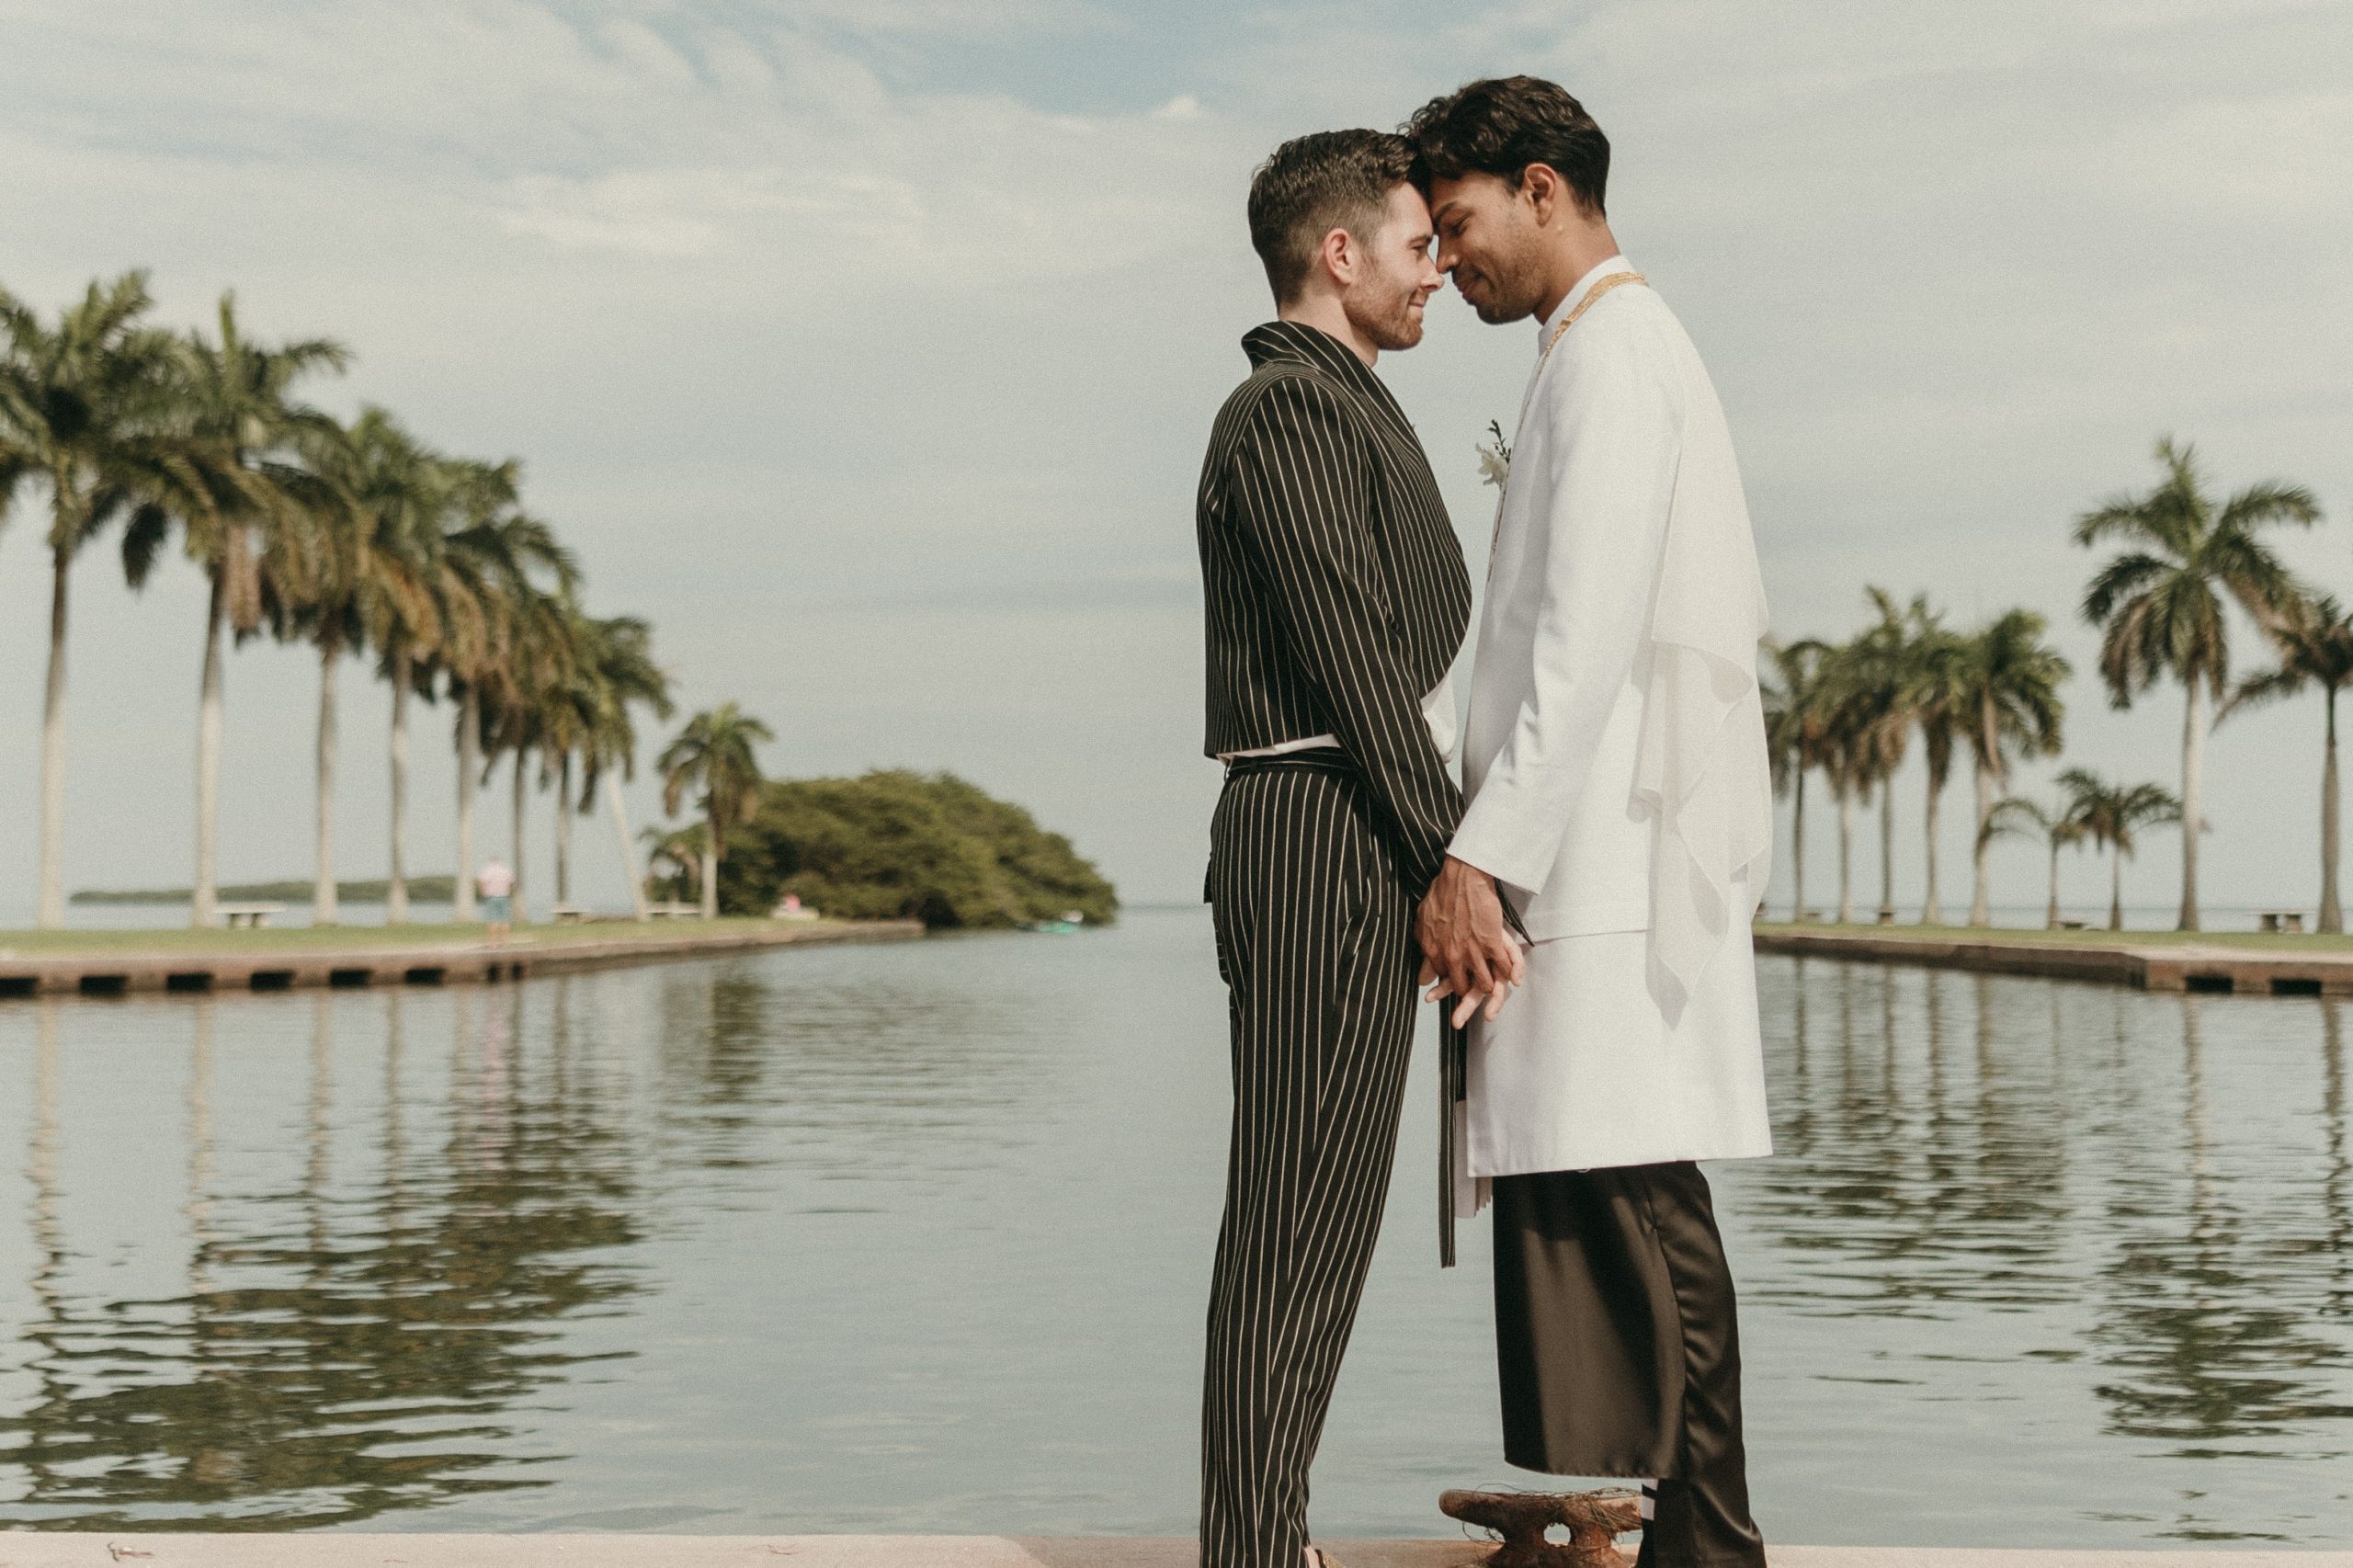 Grooms embracing each other at Deering Estate's waterfront boat basin. Biscayne Bay is in the background, and rows of palm trees line both sides of the photo.